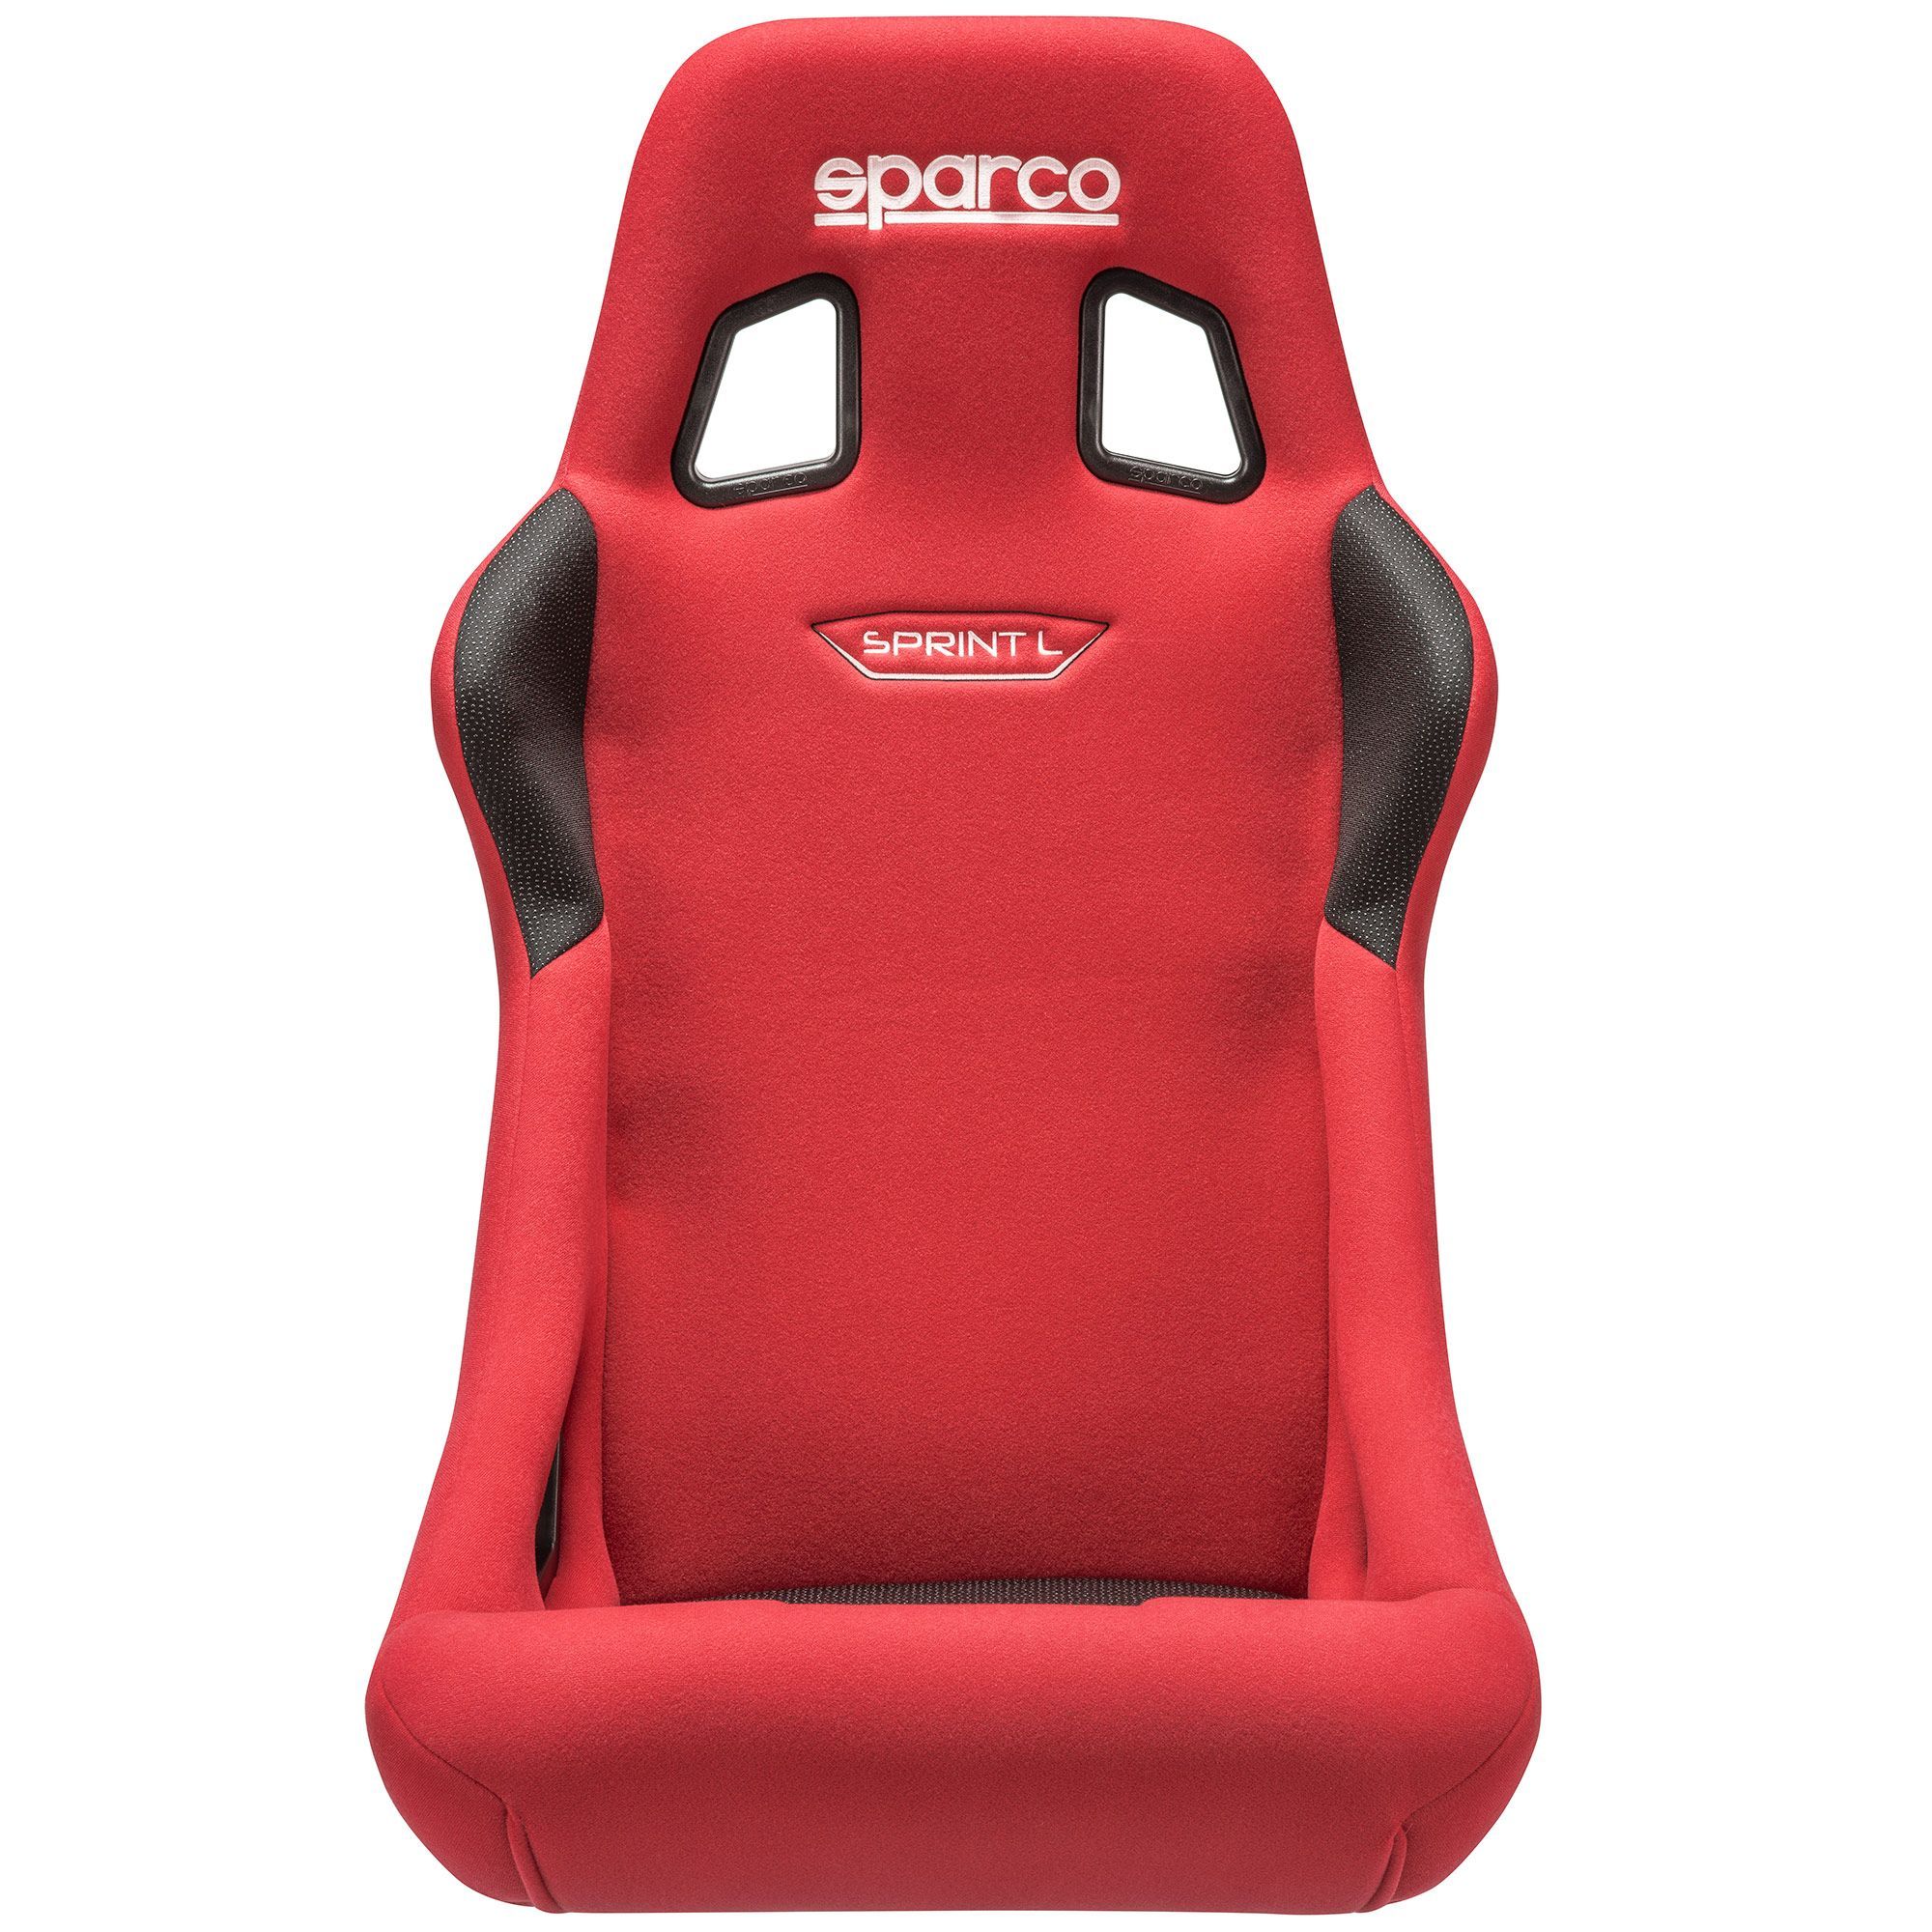 Seat Sparco Sprint L Red, Sparco